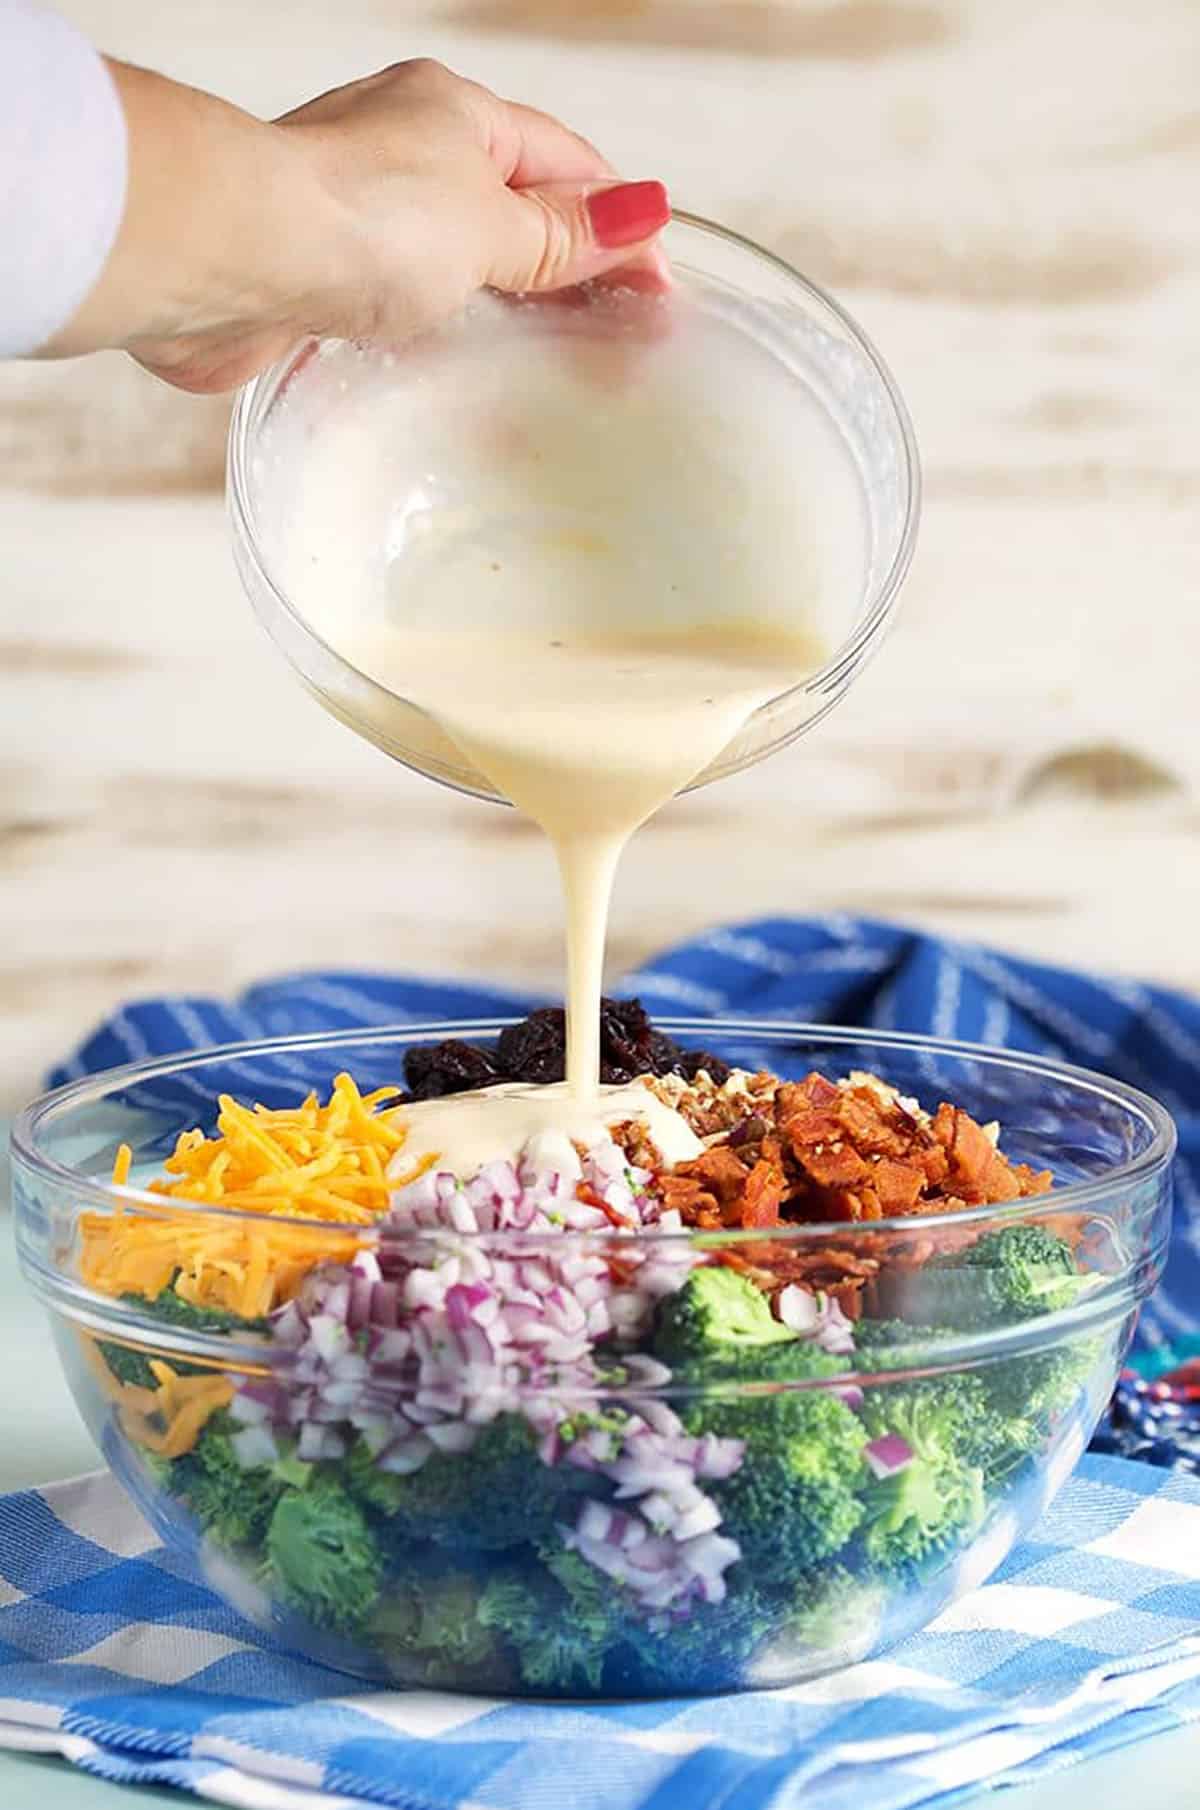 Broccoli salad dressing being poured over the salad in a glass bowl.